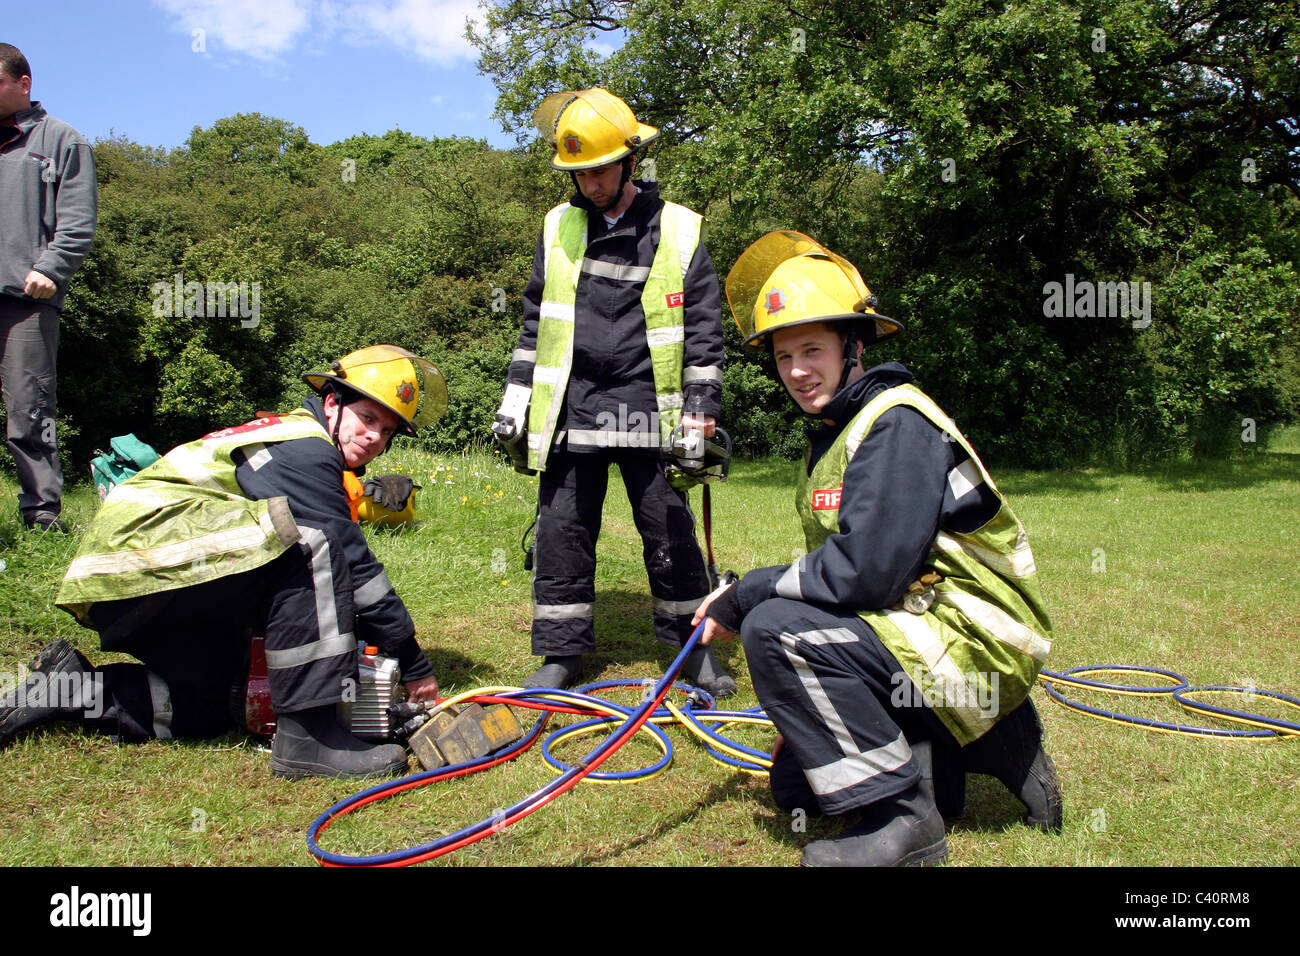 Firemen stowing cutting gear at the scene of an accident Stock Photo